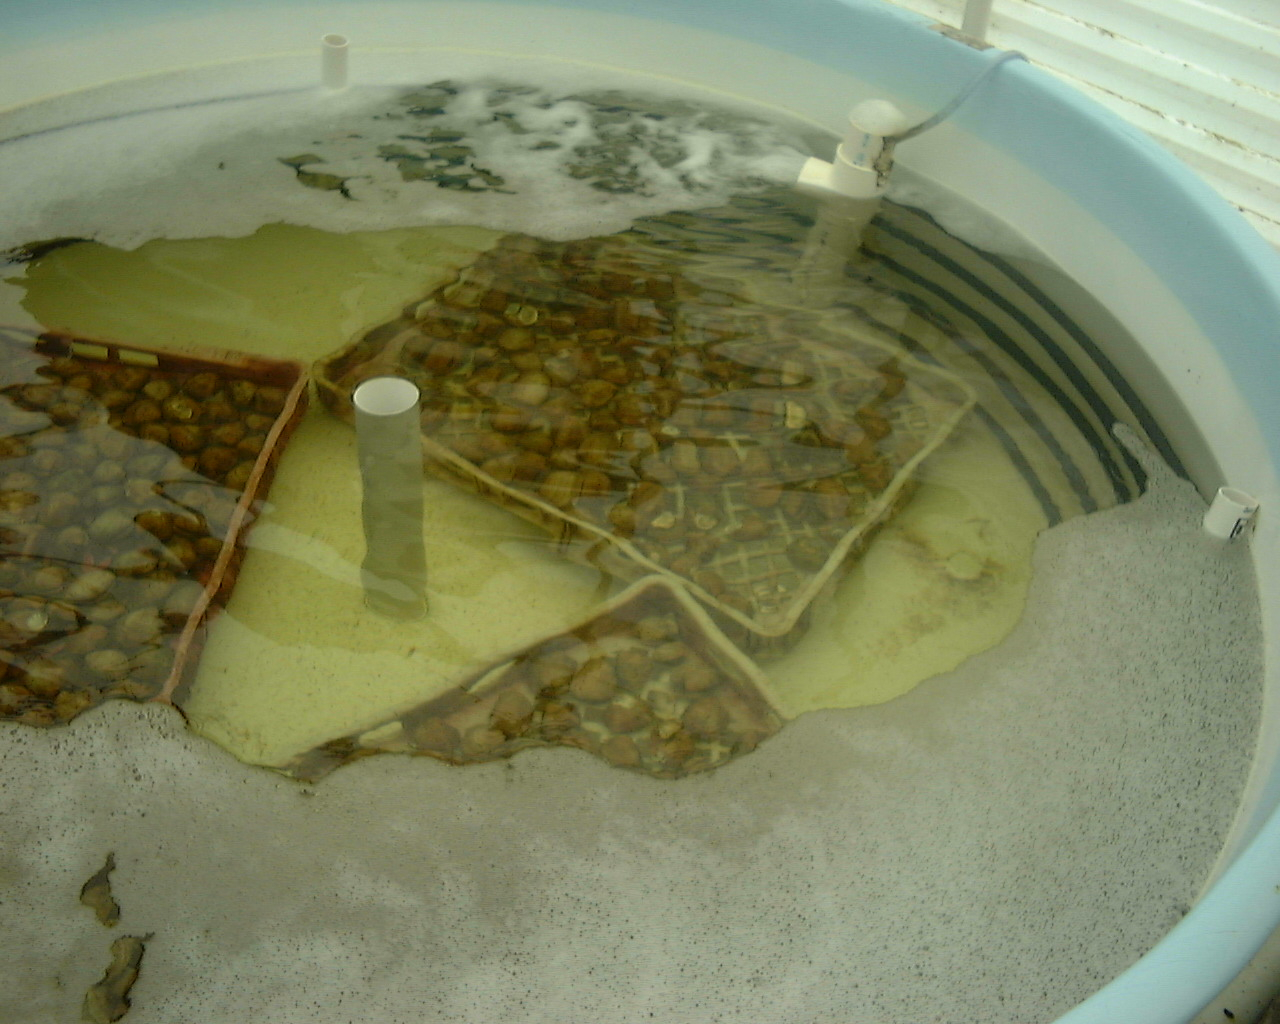 Clam spat being held in trays in a recirculating tank for grow-out at HarborBranch Oceanographic Institute Laboratory